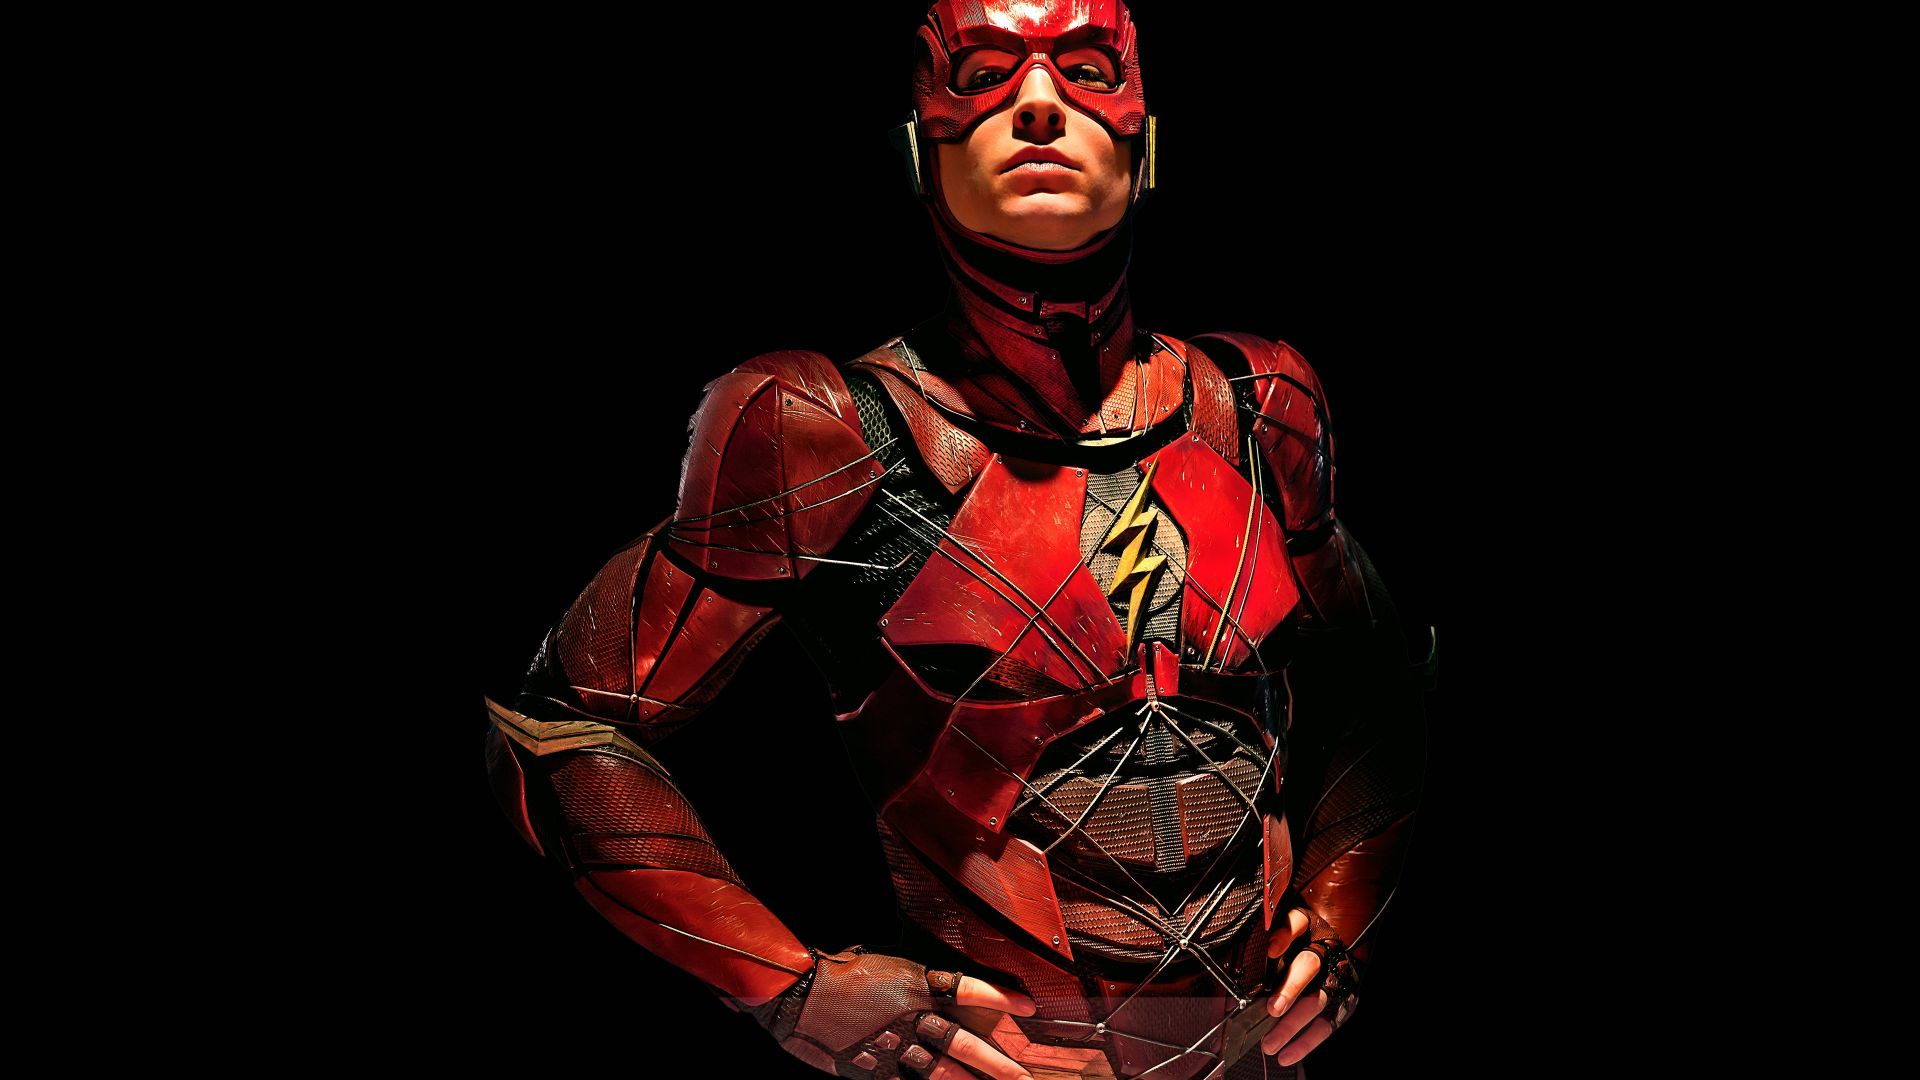 Justice League, The Flash, Grant Gustin, 4k (horizontal)